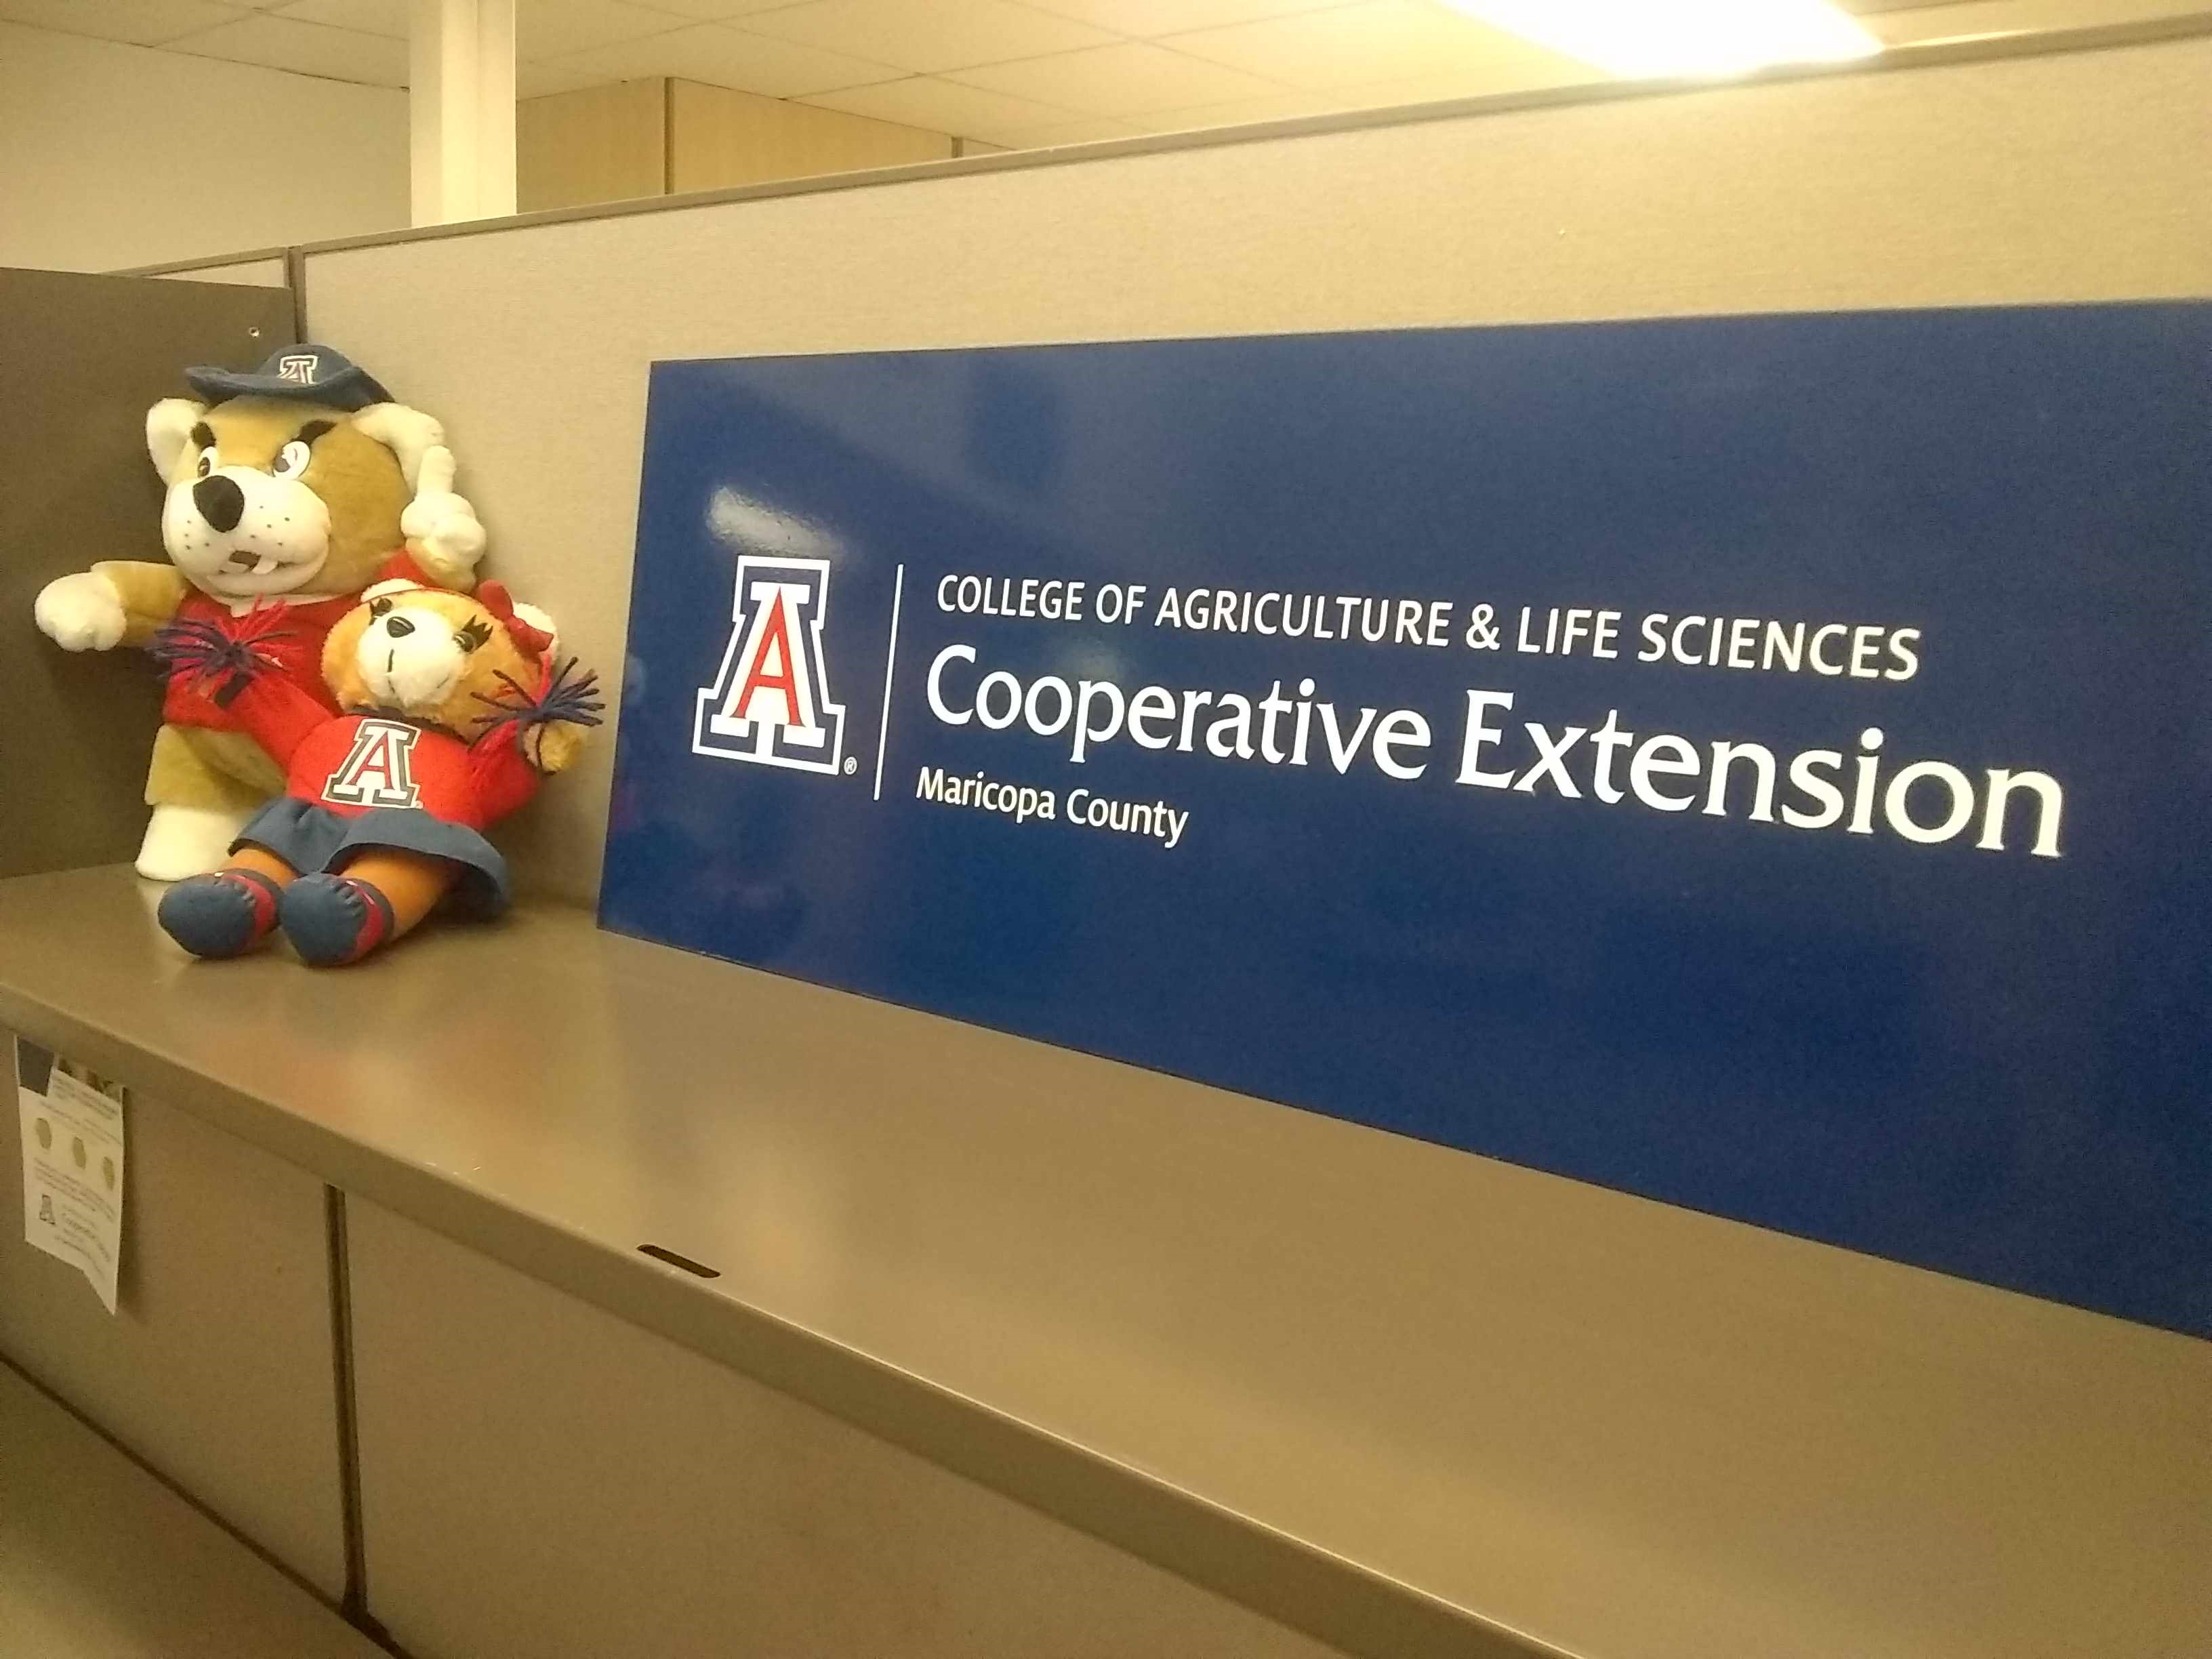 University of Arizona mascots Wilbur and Wilma greet visitors to the Maricopa County Extension office in Phoenix.